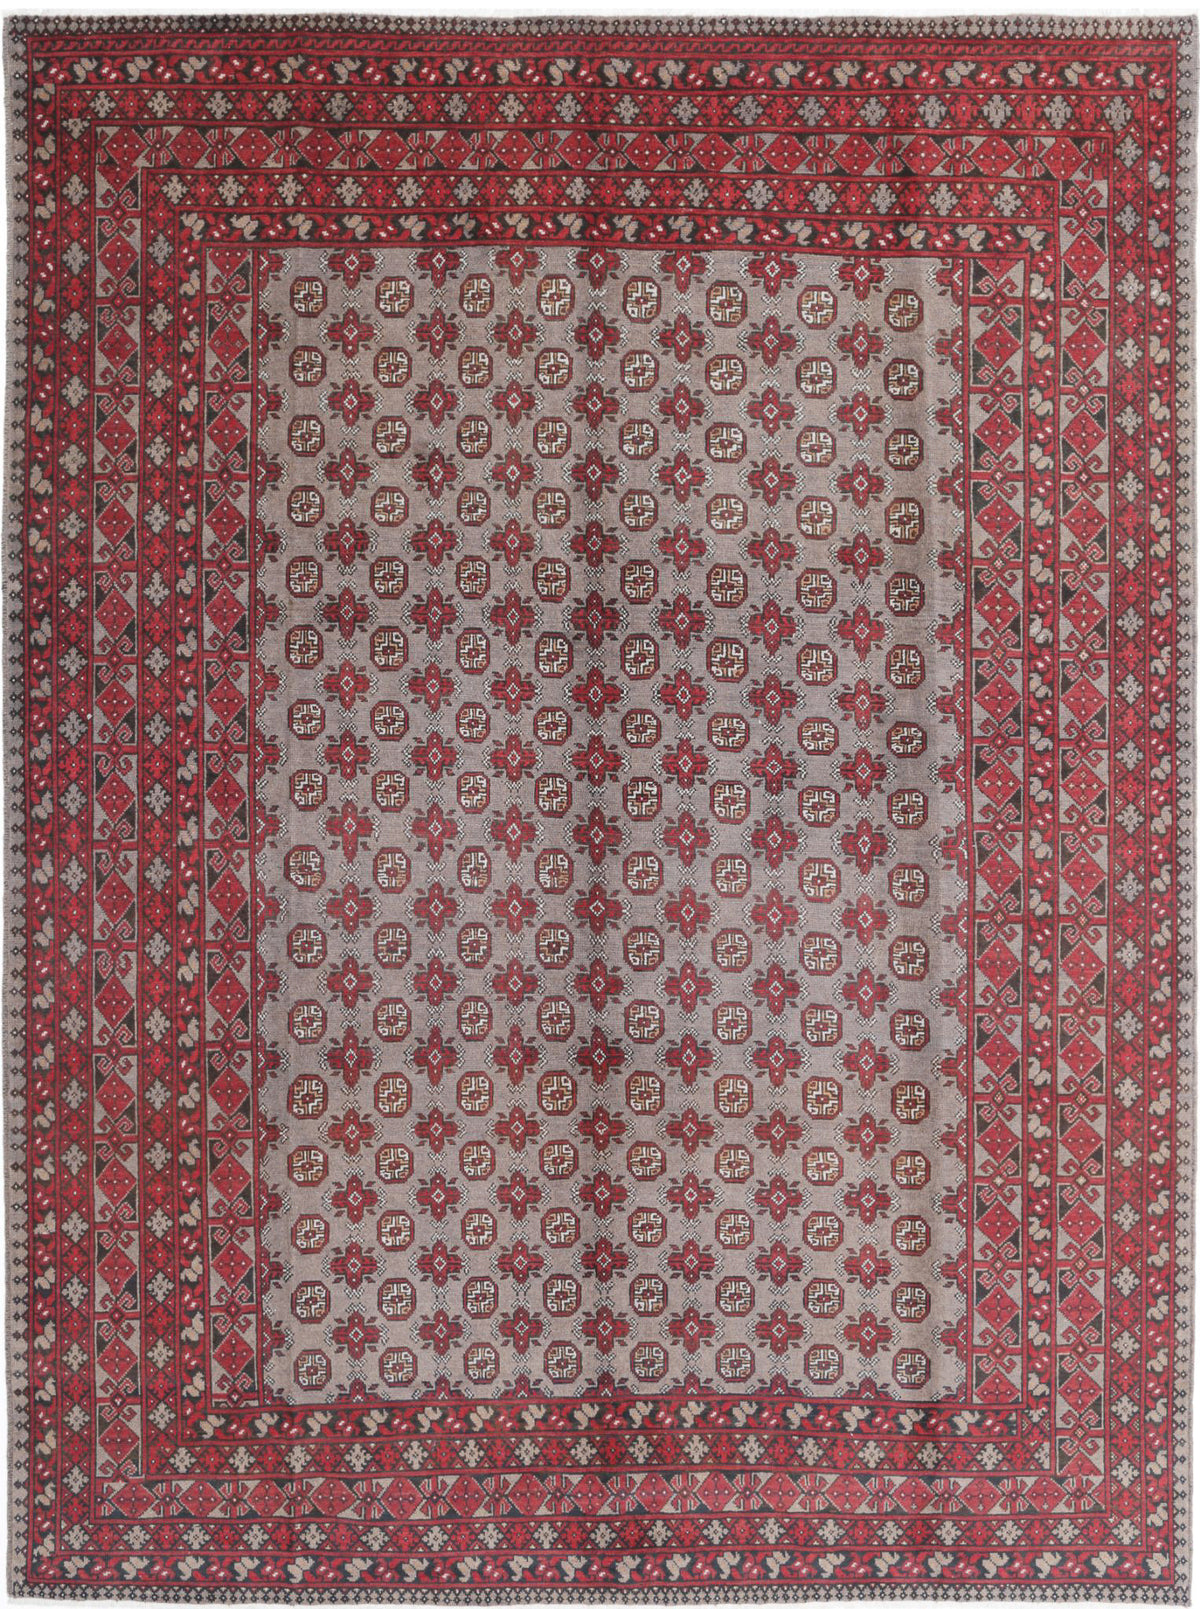 Revival-hand-knotted-gul-collection-wool-rug-5013984.jpg